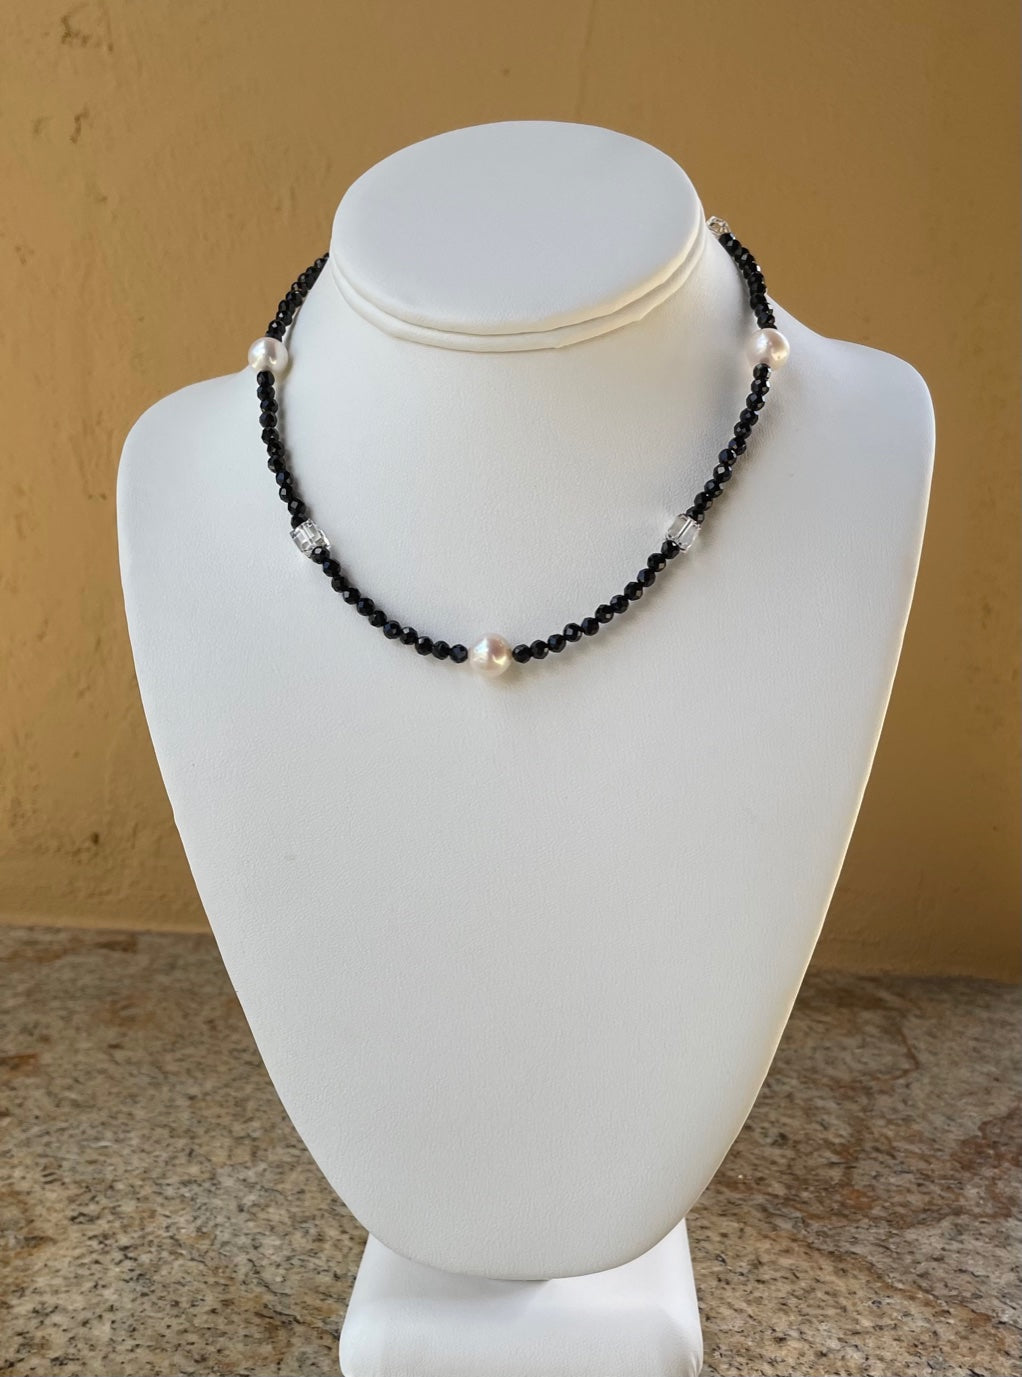 Necklace - Black spinel with white round pearls and Swarovski crystals